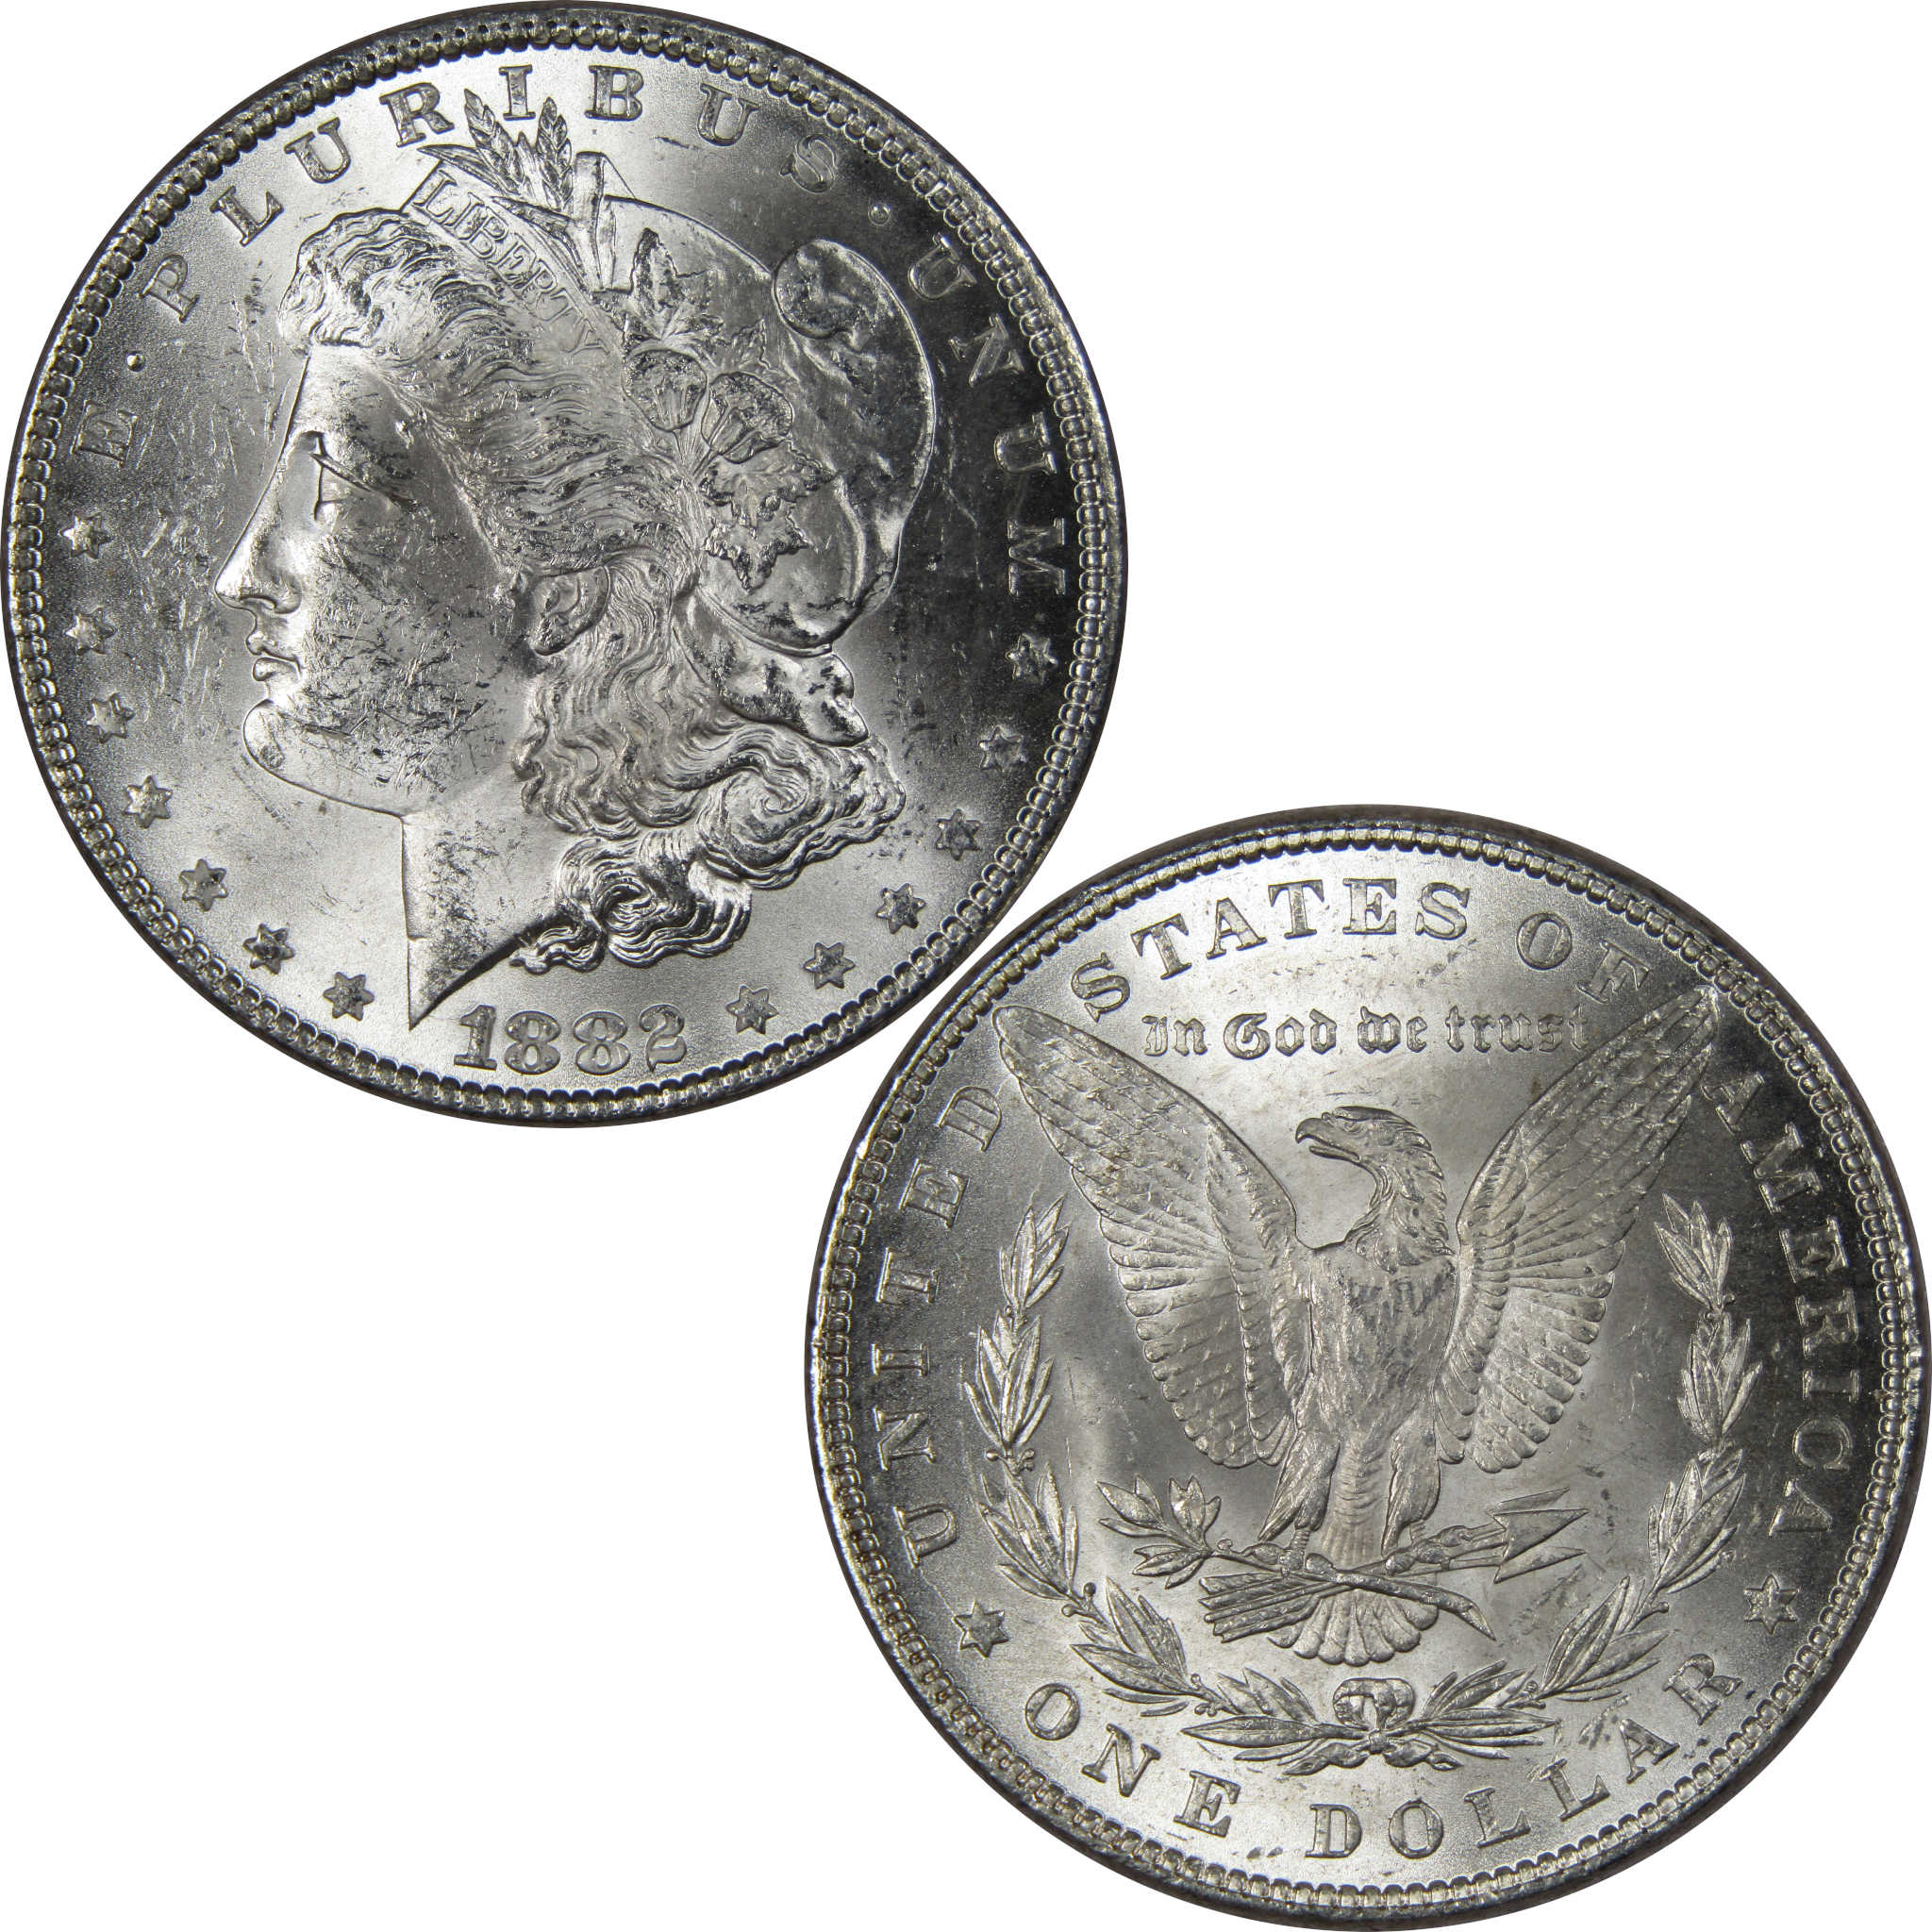 1882 Morgan Dollar BU Uncirculated Mint State 90% Silver SKU:IPC9642 - Morgan coin - Morgan silver dollar - Morgan silver dollar for sale - Profile Coins &amp; Collectibles